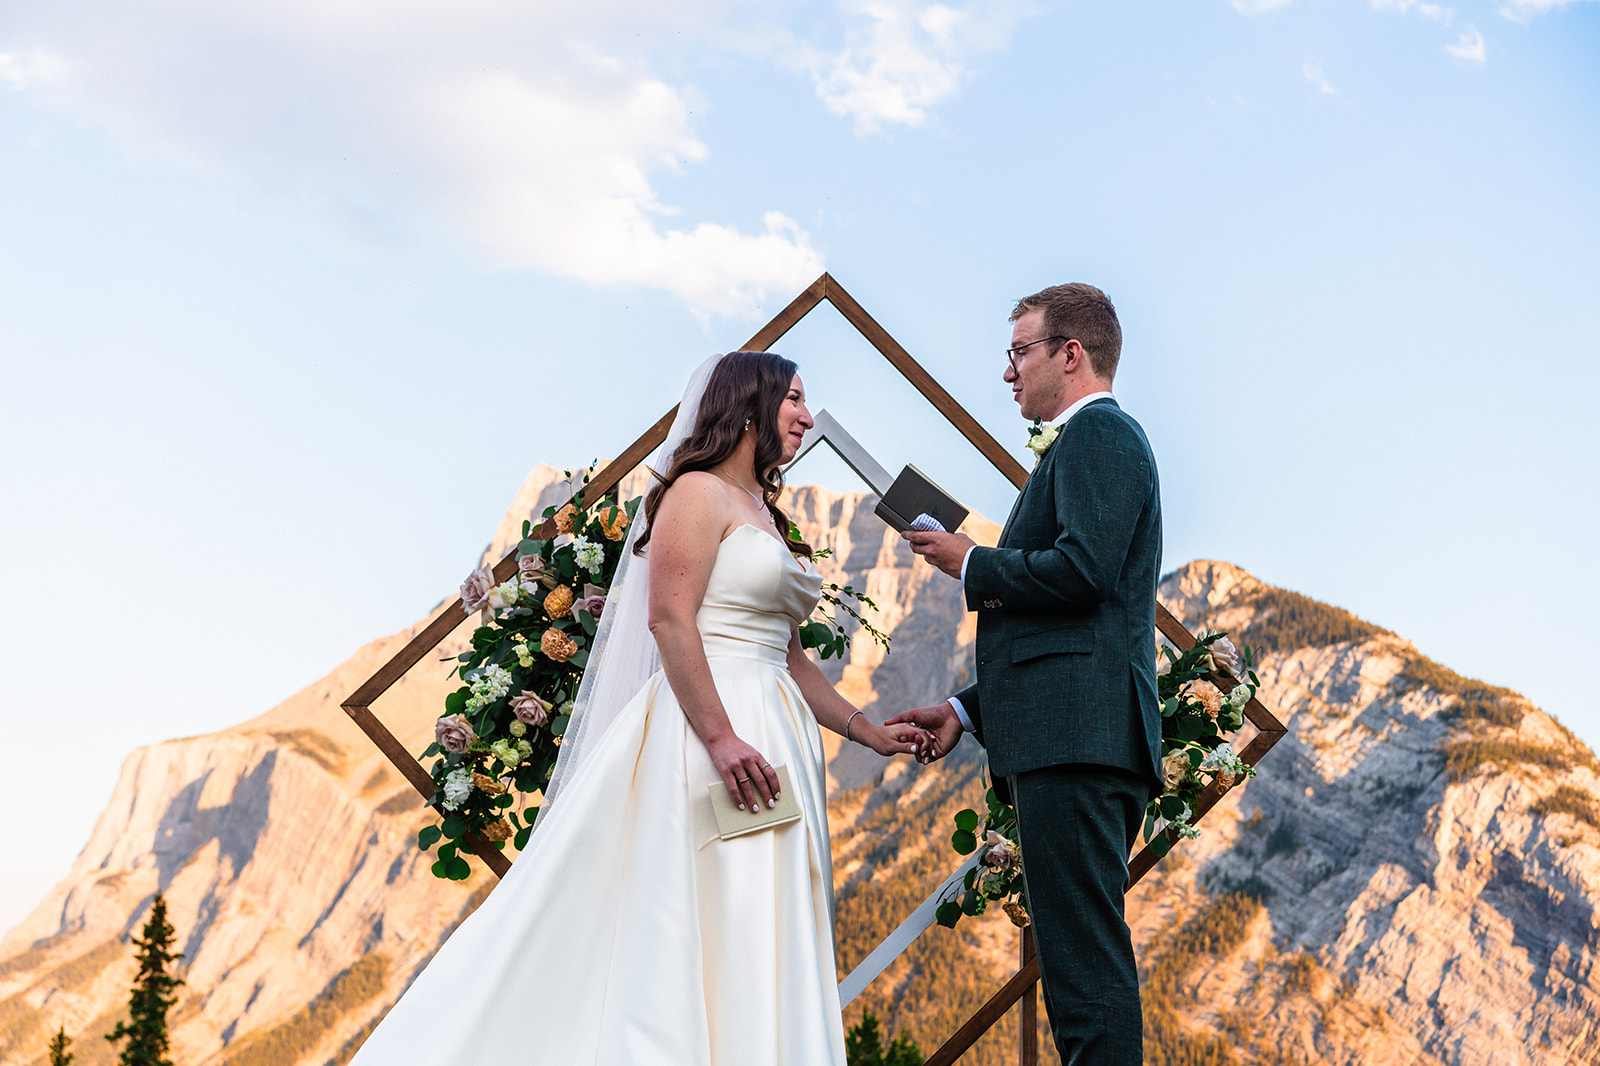 Intimate Banff Wedding and Elopement ceremony